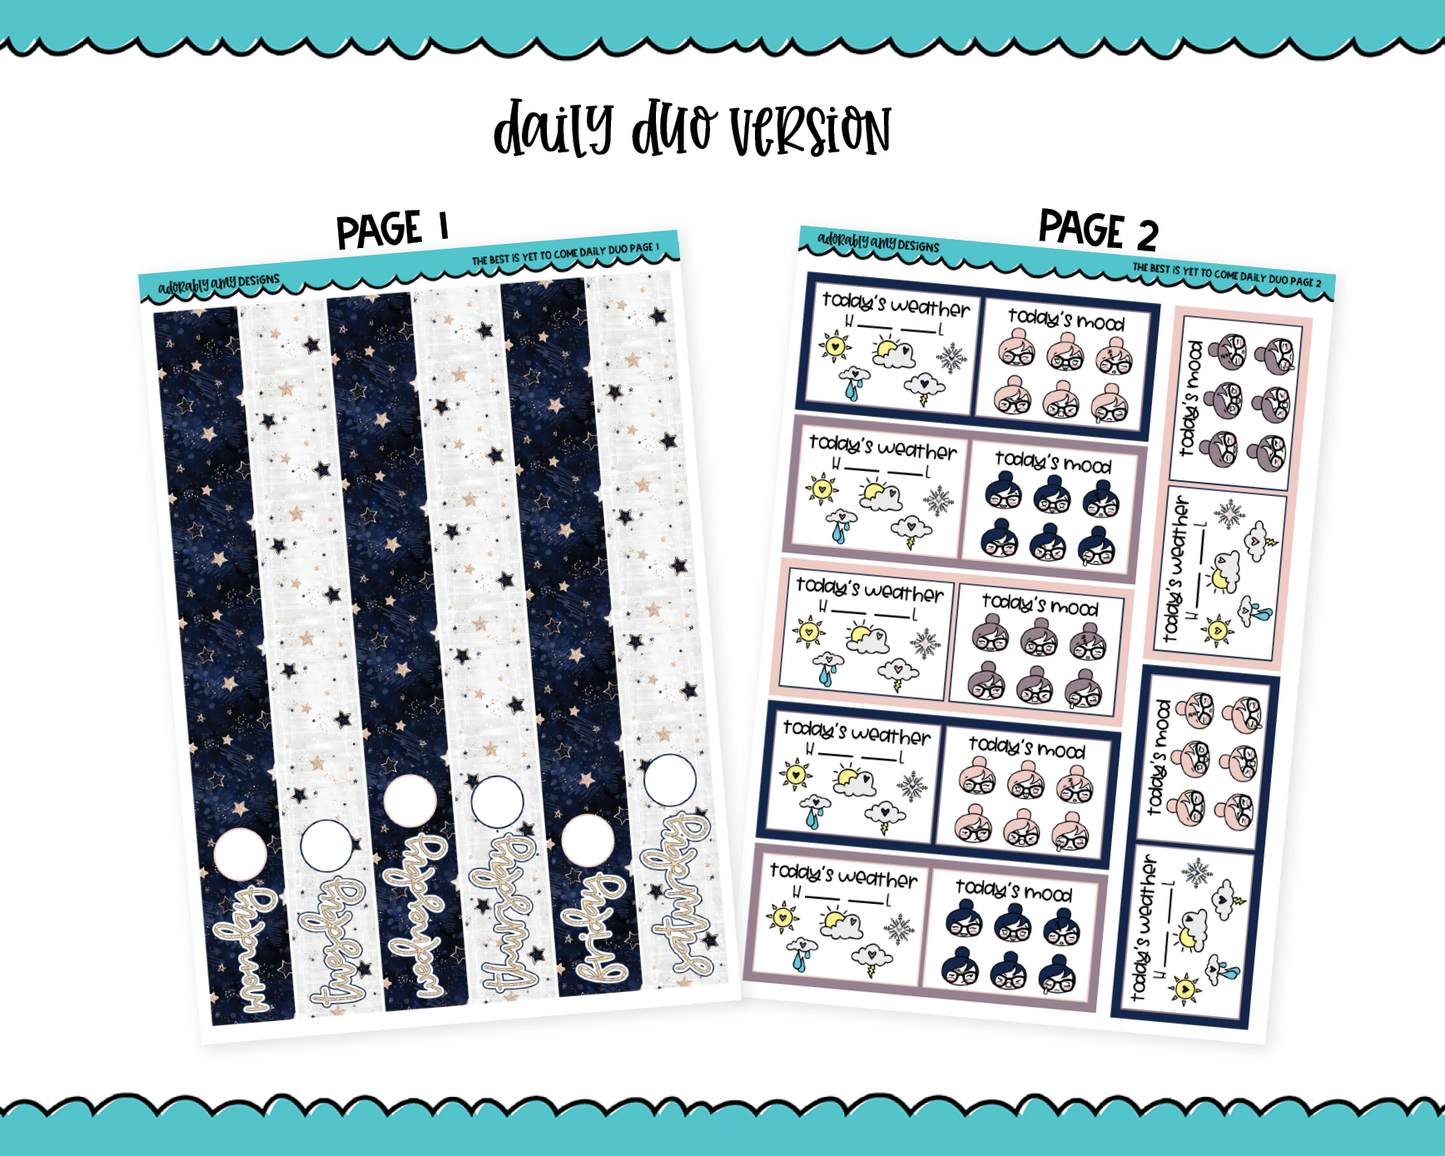 Daily Duo The Best is Yet to Come New Year's Themed Weekly Planner Sticker Kit for Daily Duo Planner